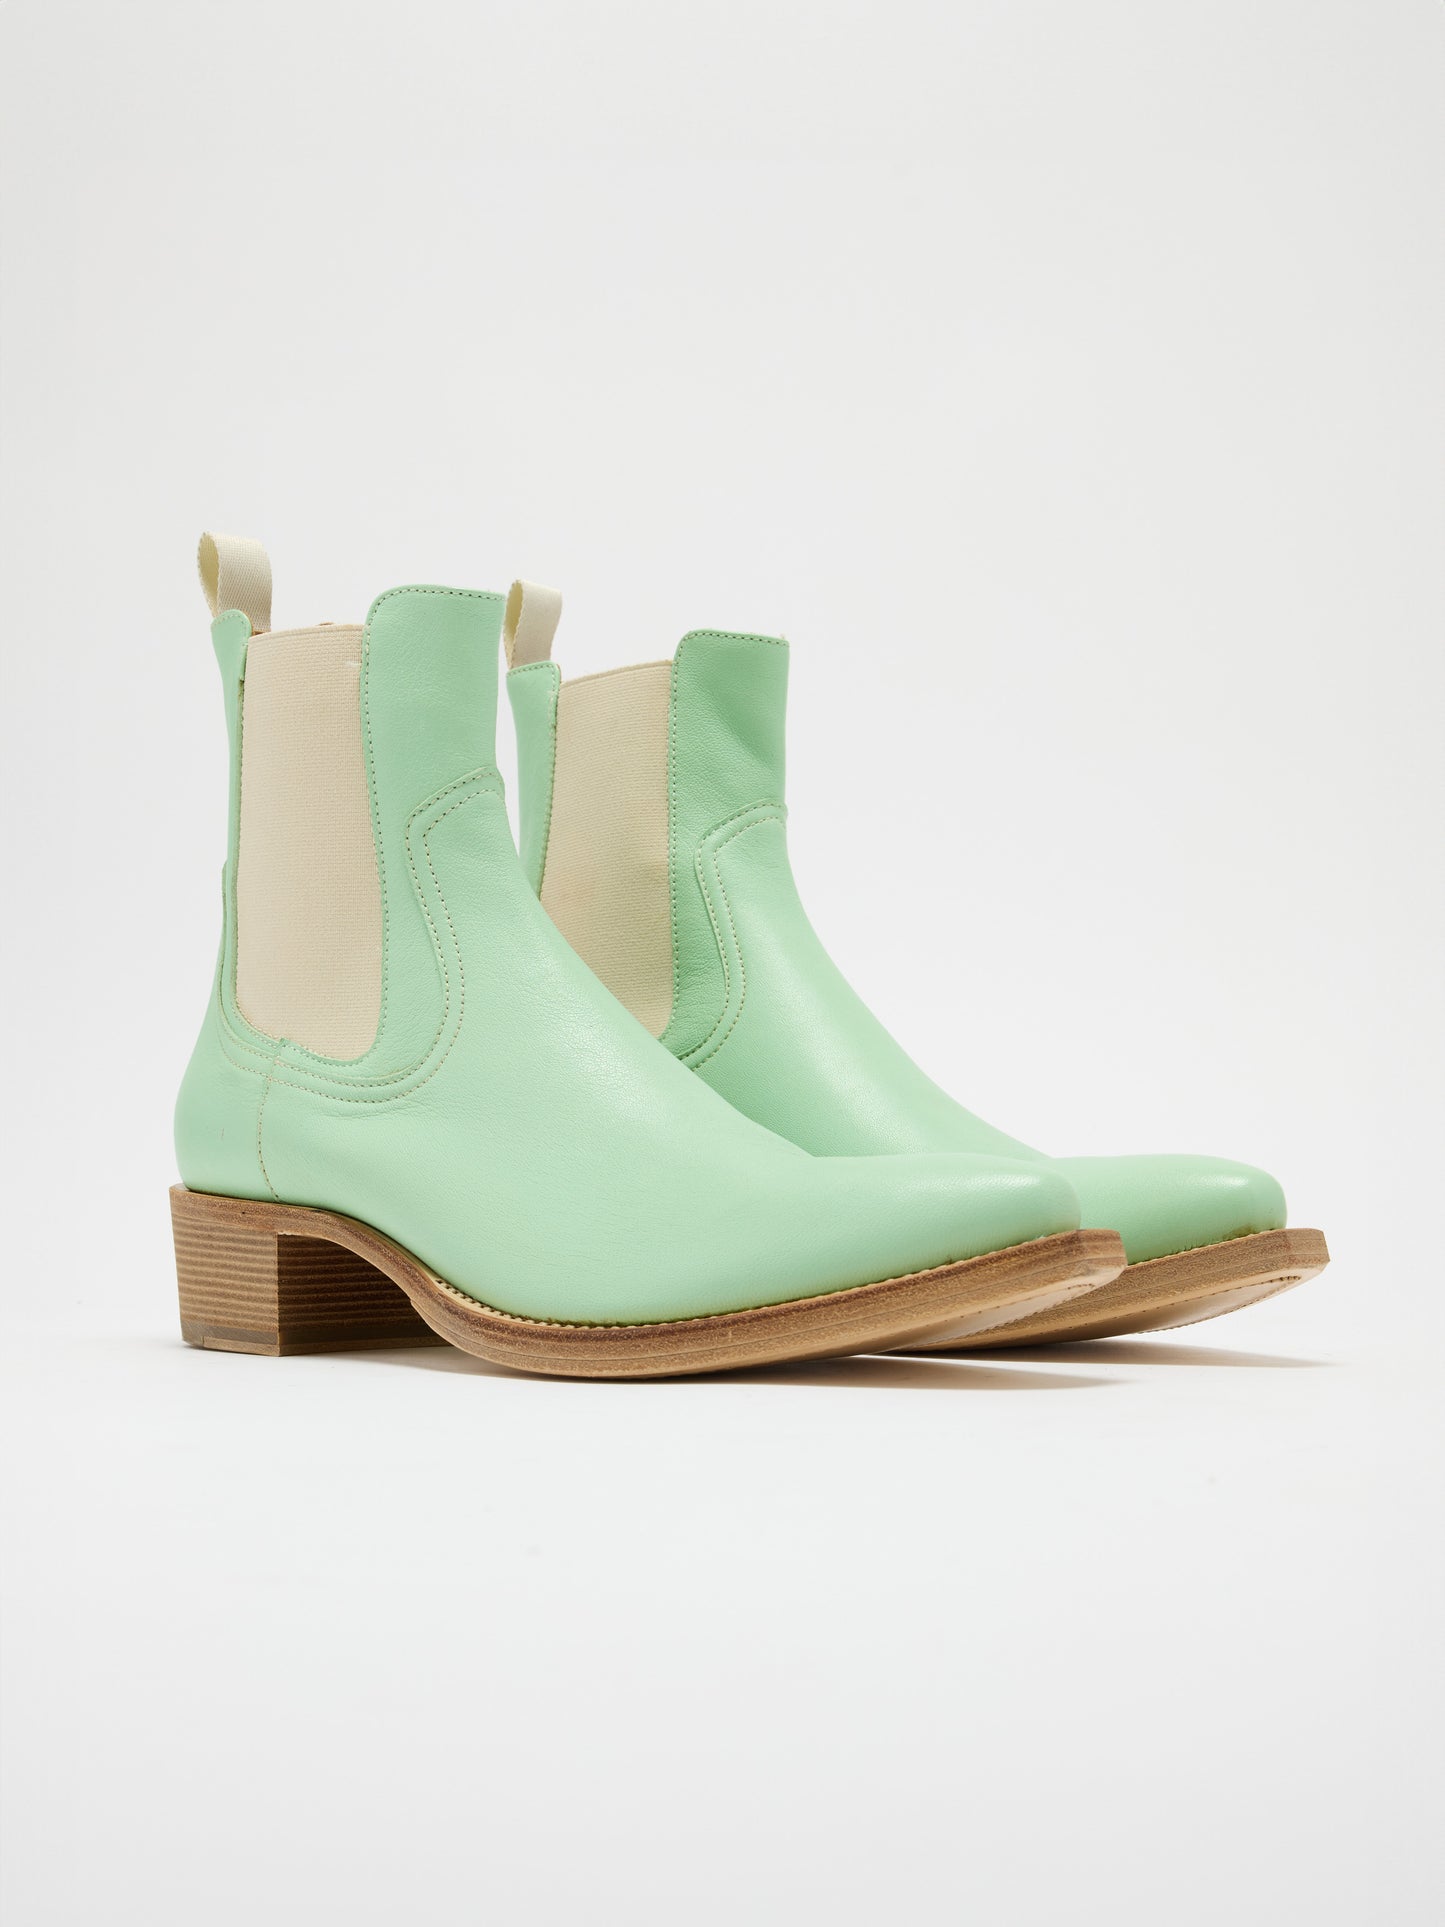 Cowboy Boots in Mint